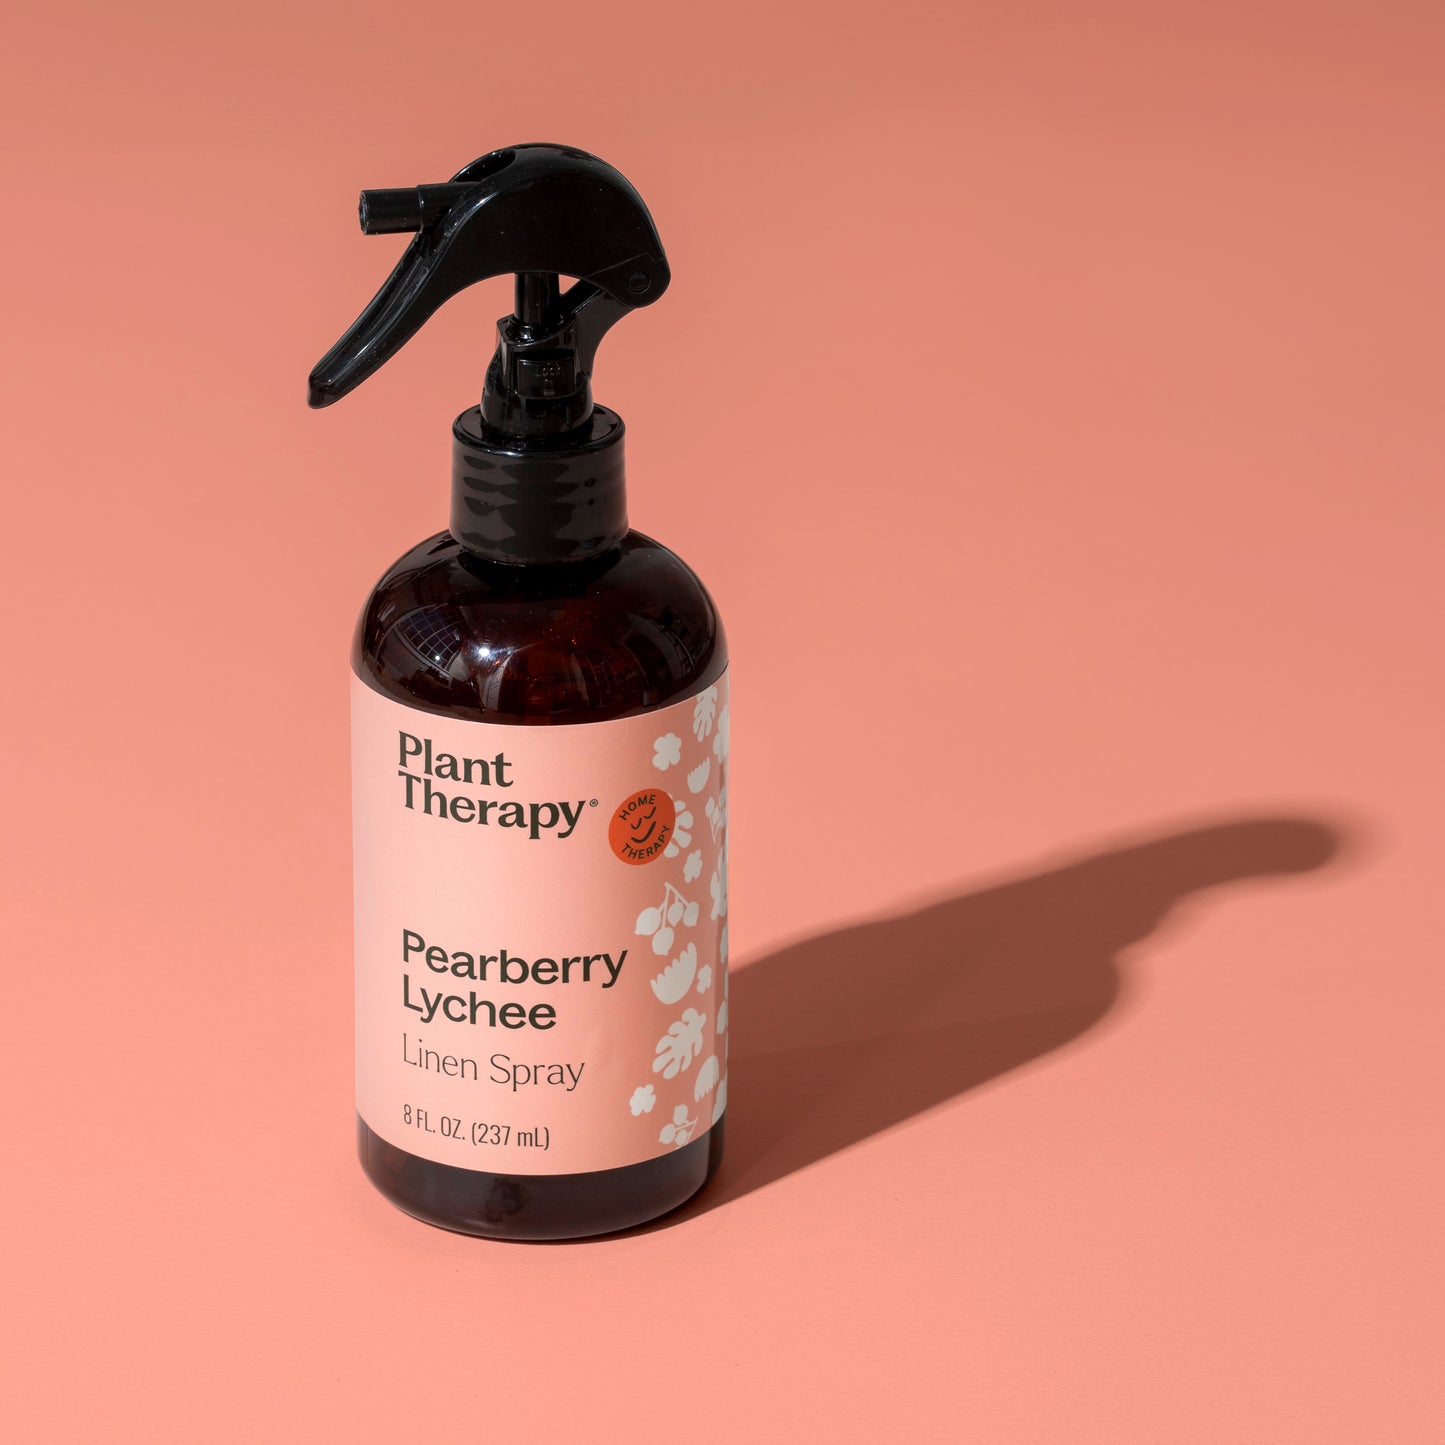 Pearberry Lychee Linen Spray